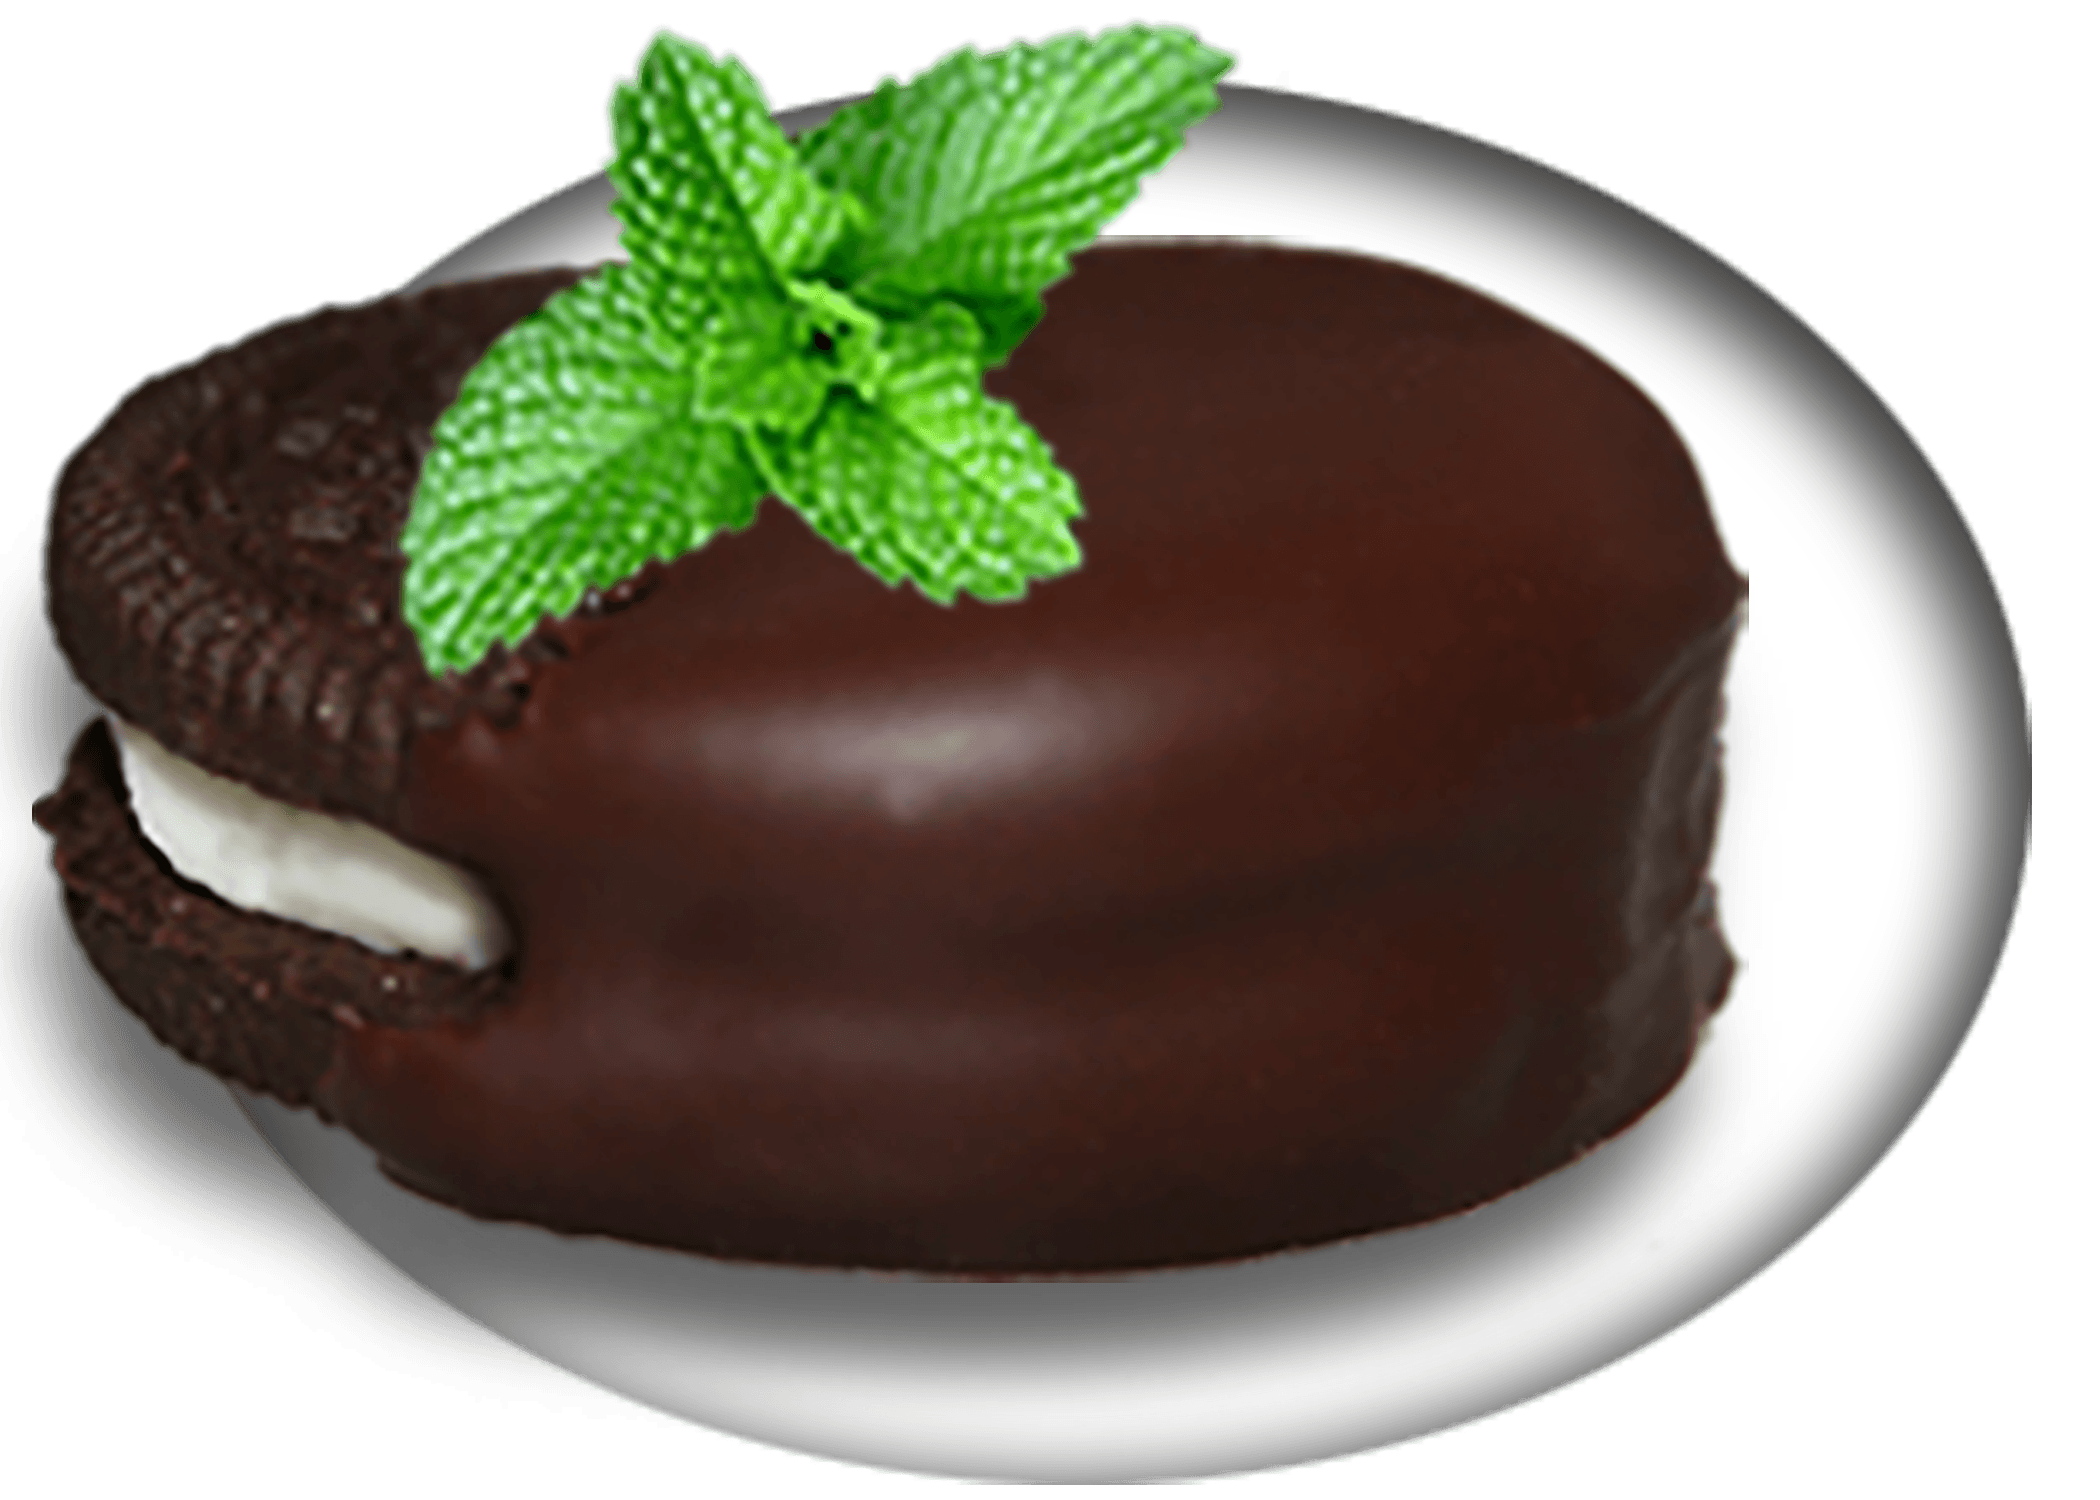 Chocolate Covered Everything — icy penguins - Organic minty cookie & creme sandwich, dipped in dark chocolate. Shipping, delivery, and pick up. Place your order!